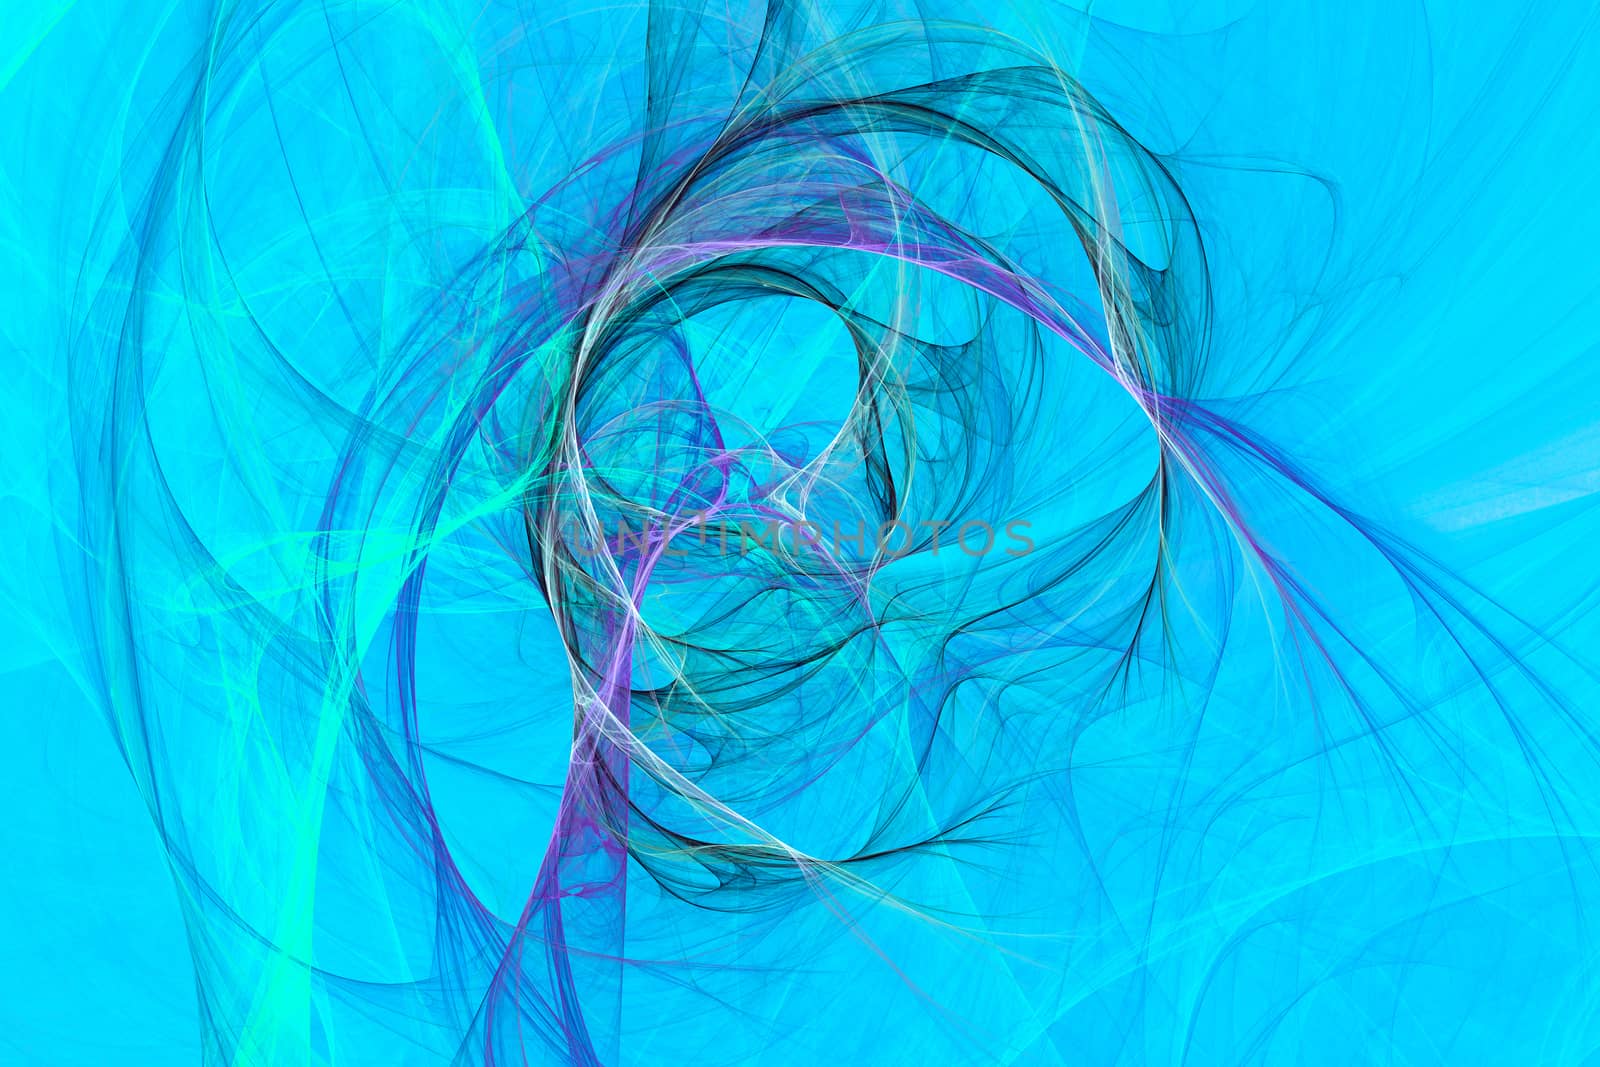 A abstract fractal background created using the recursive fractal flame algorithm.